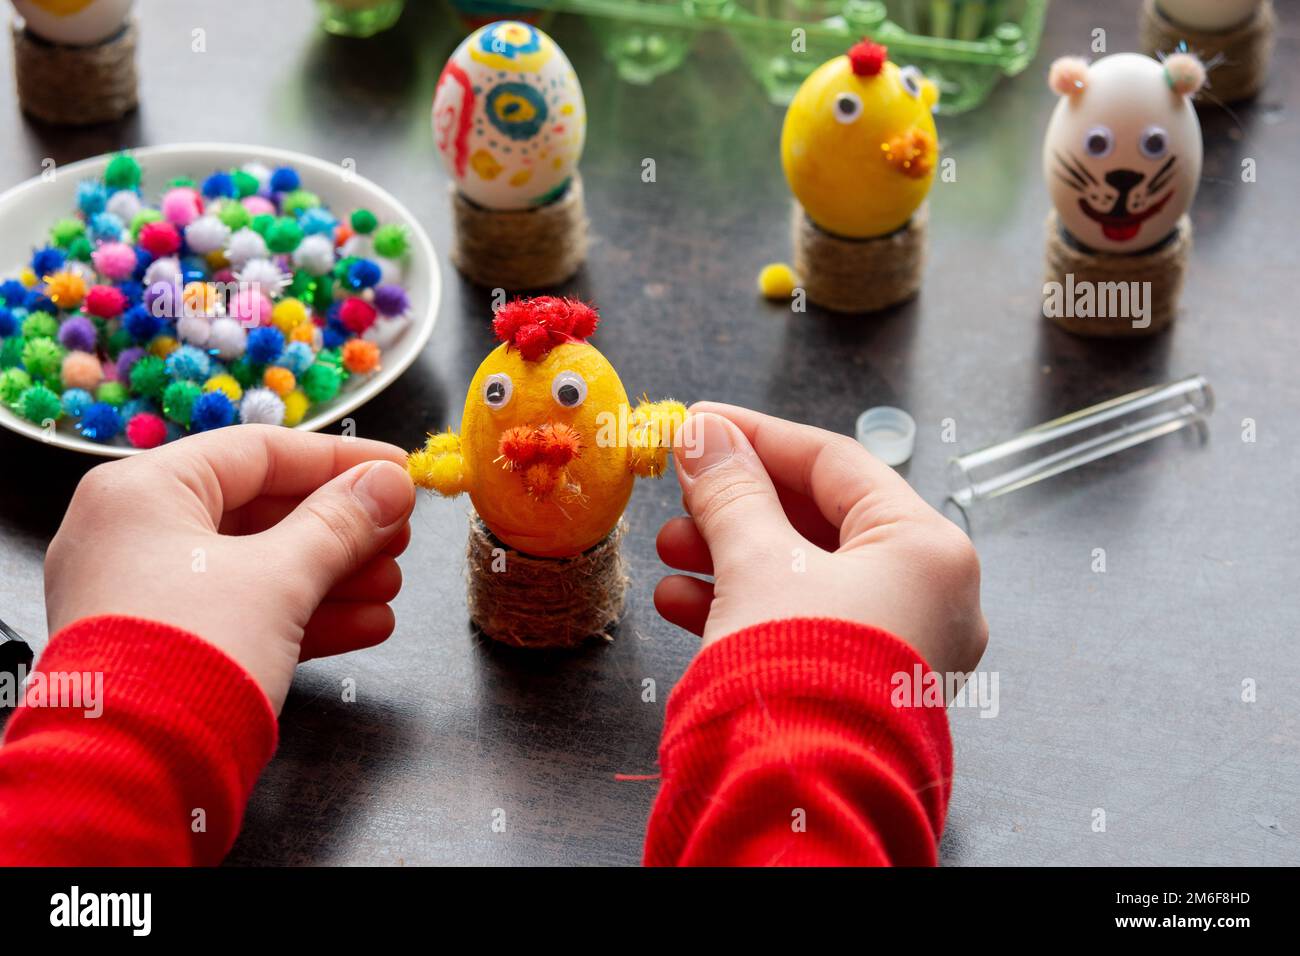 Children's hands made a chicken craft out of an egg, there are other figures in the background Stock Photo